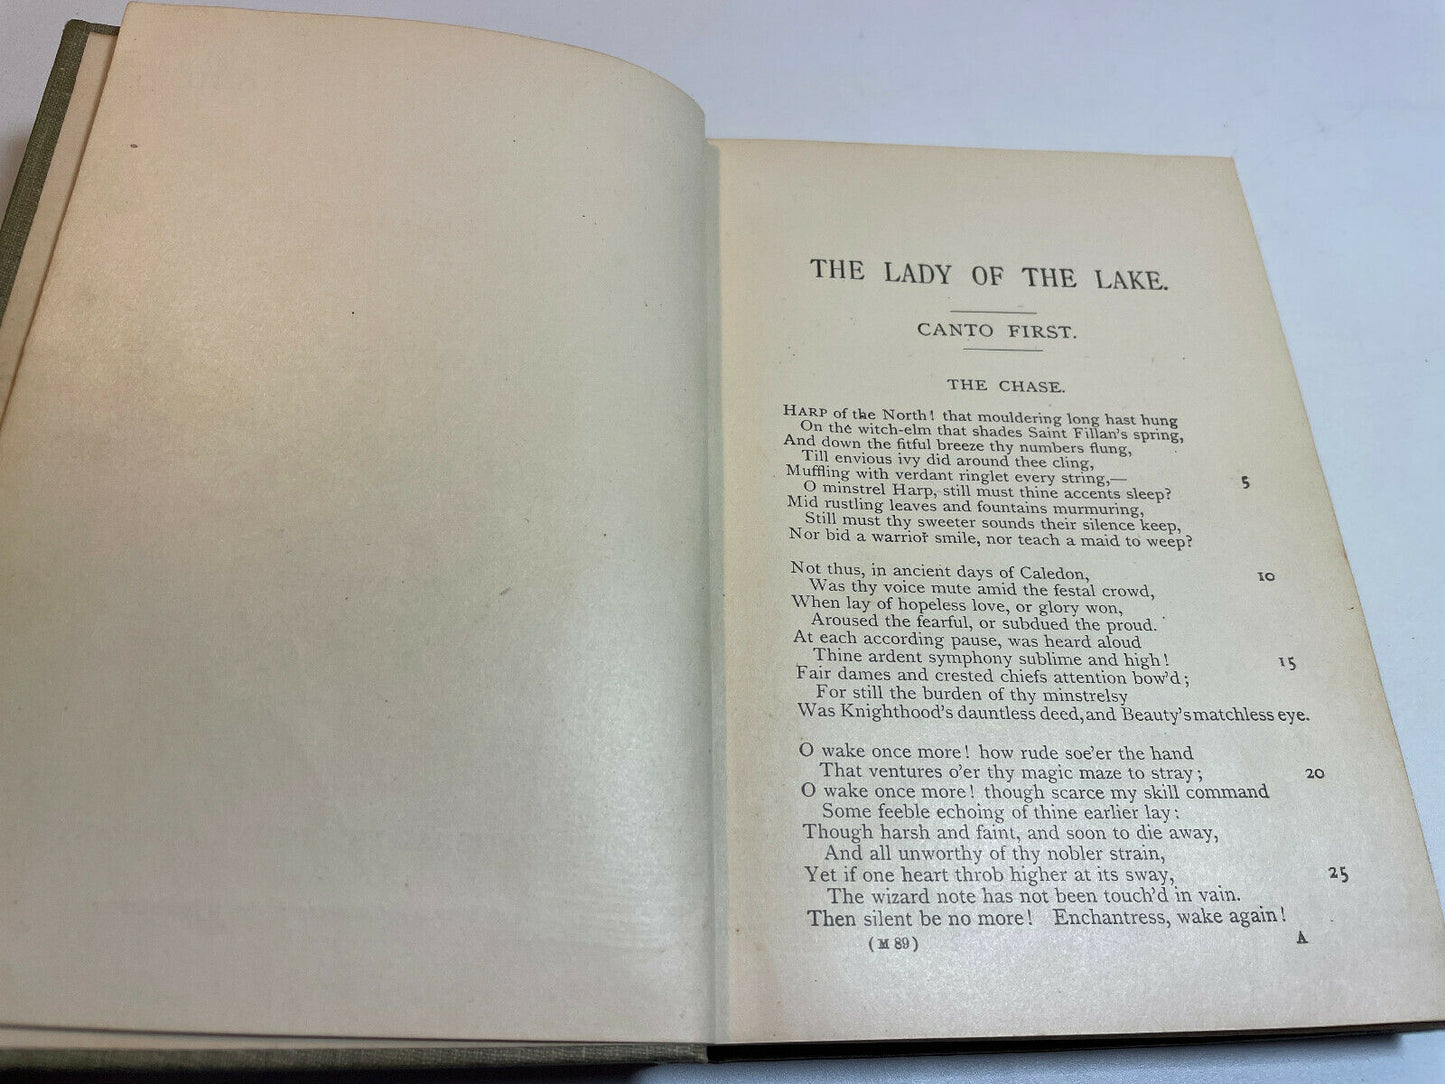 The Lady of the Lake by Sir Walter Scott (B2)